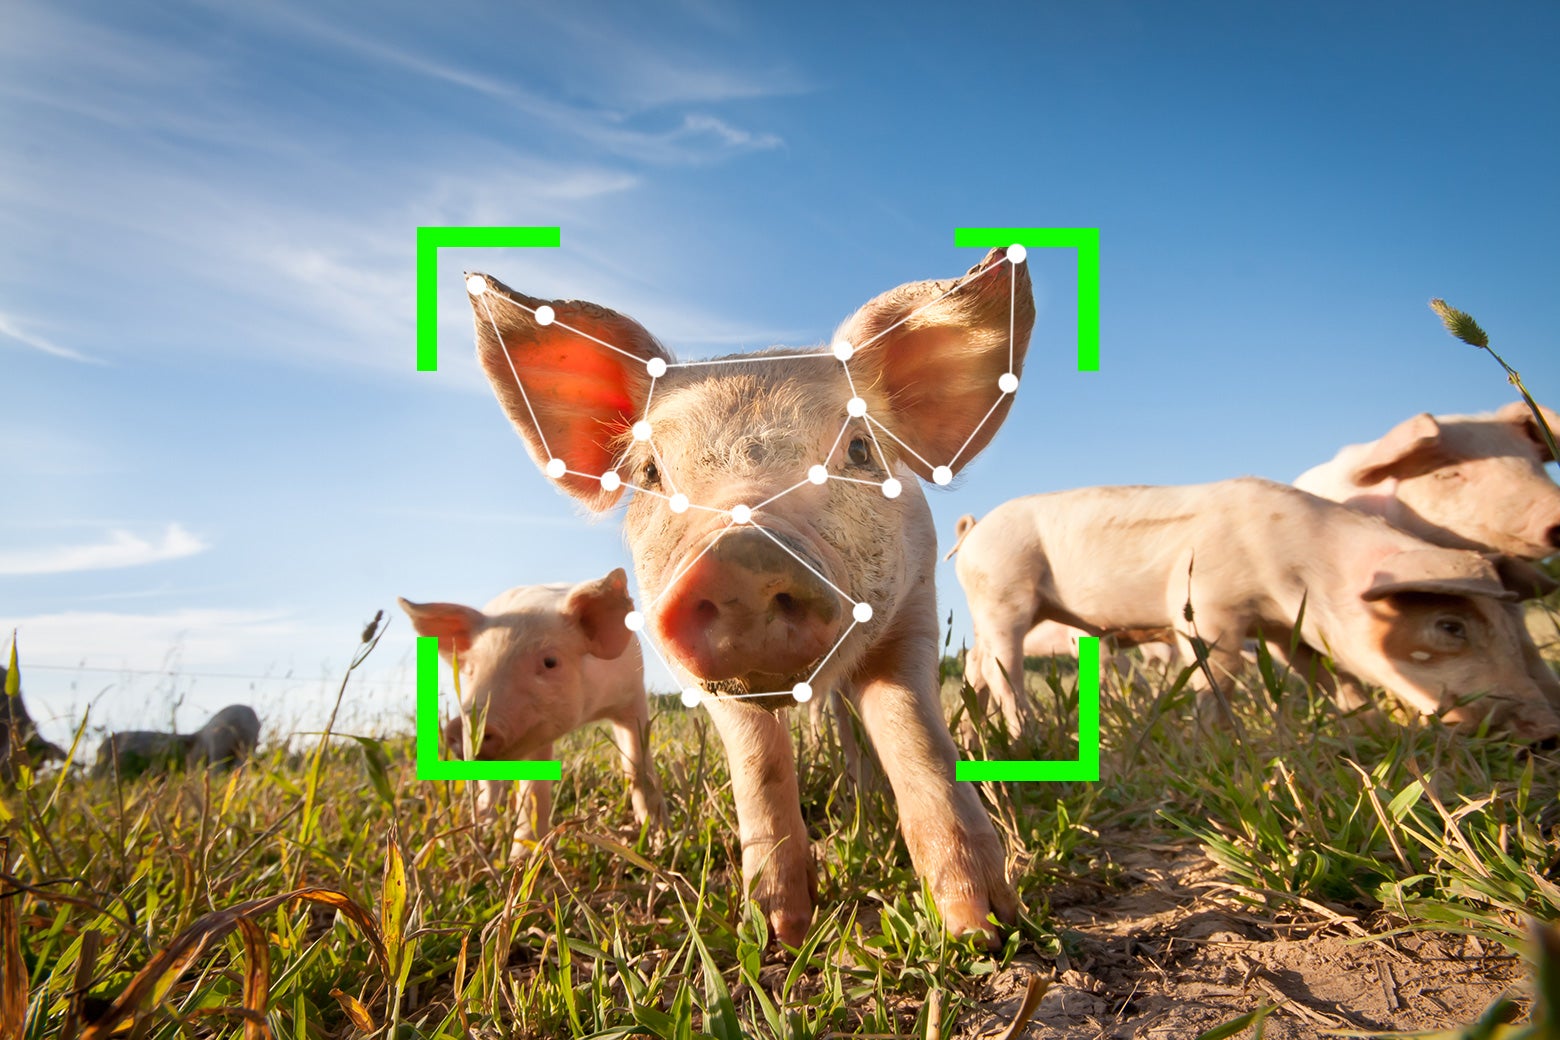 Pigs in a field, with a face detection frame over one pig's face.